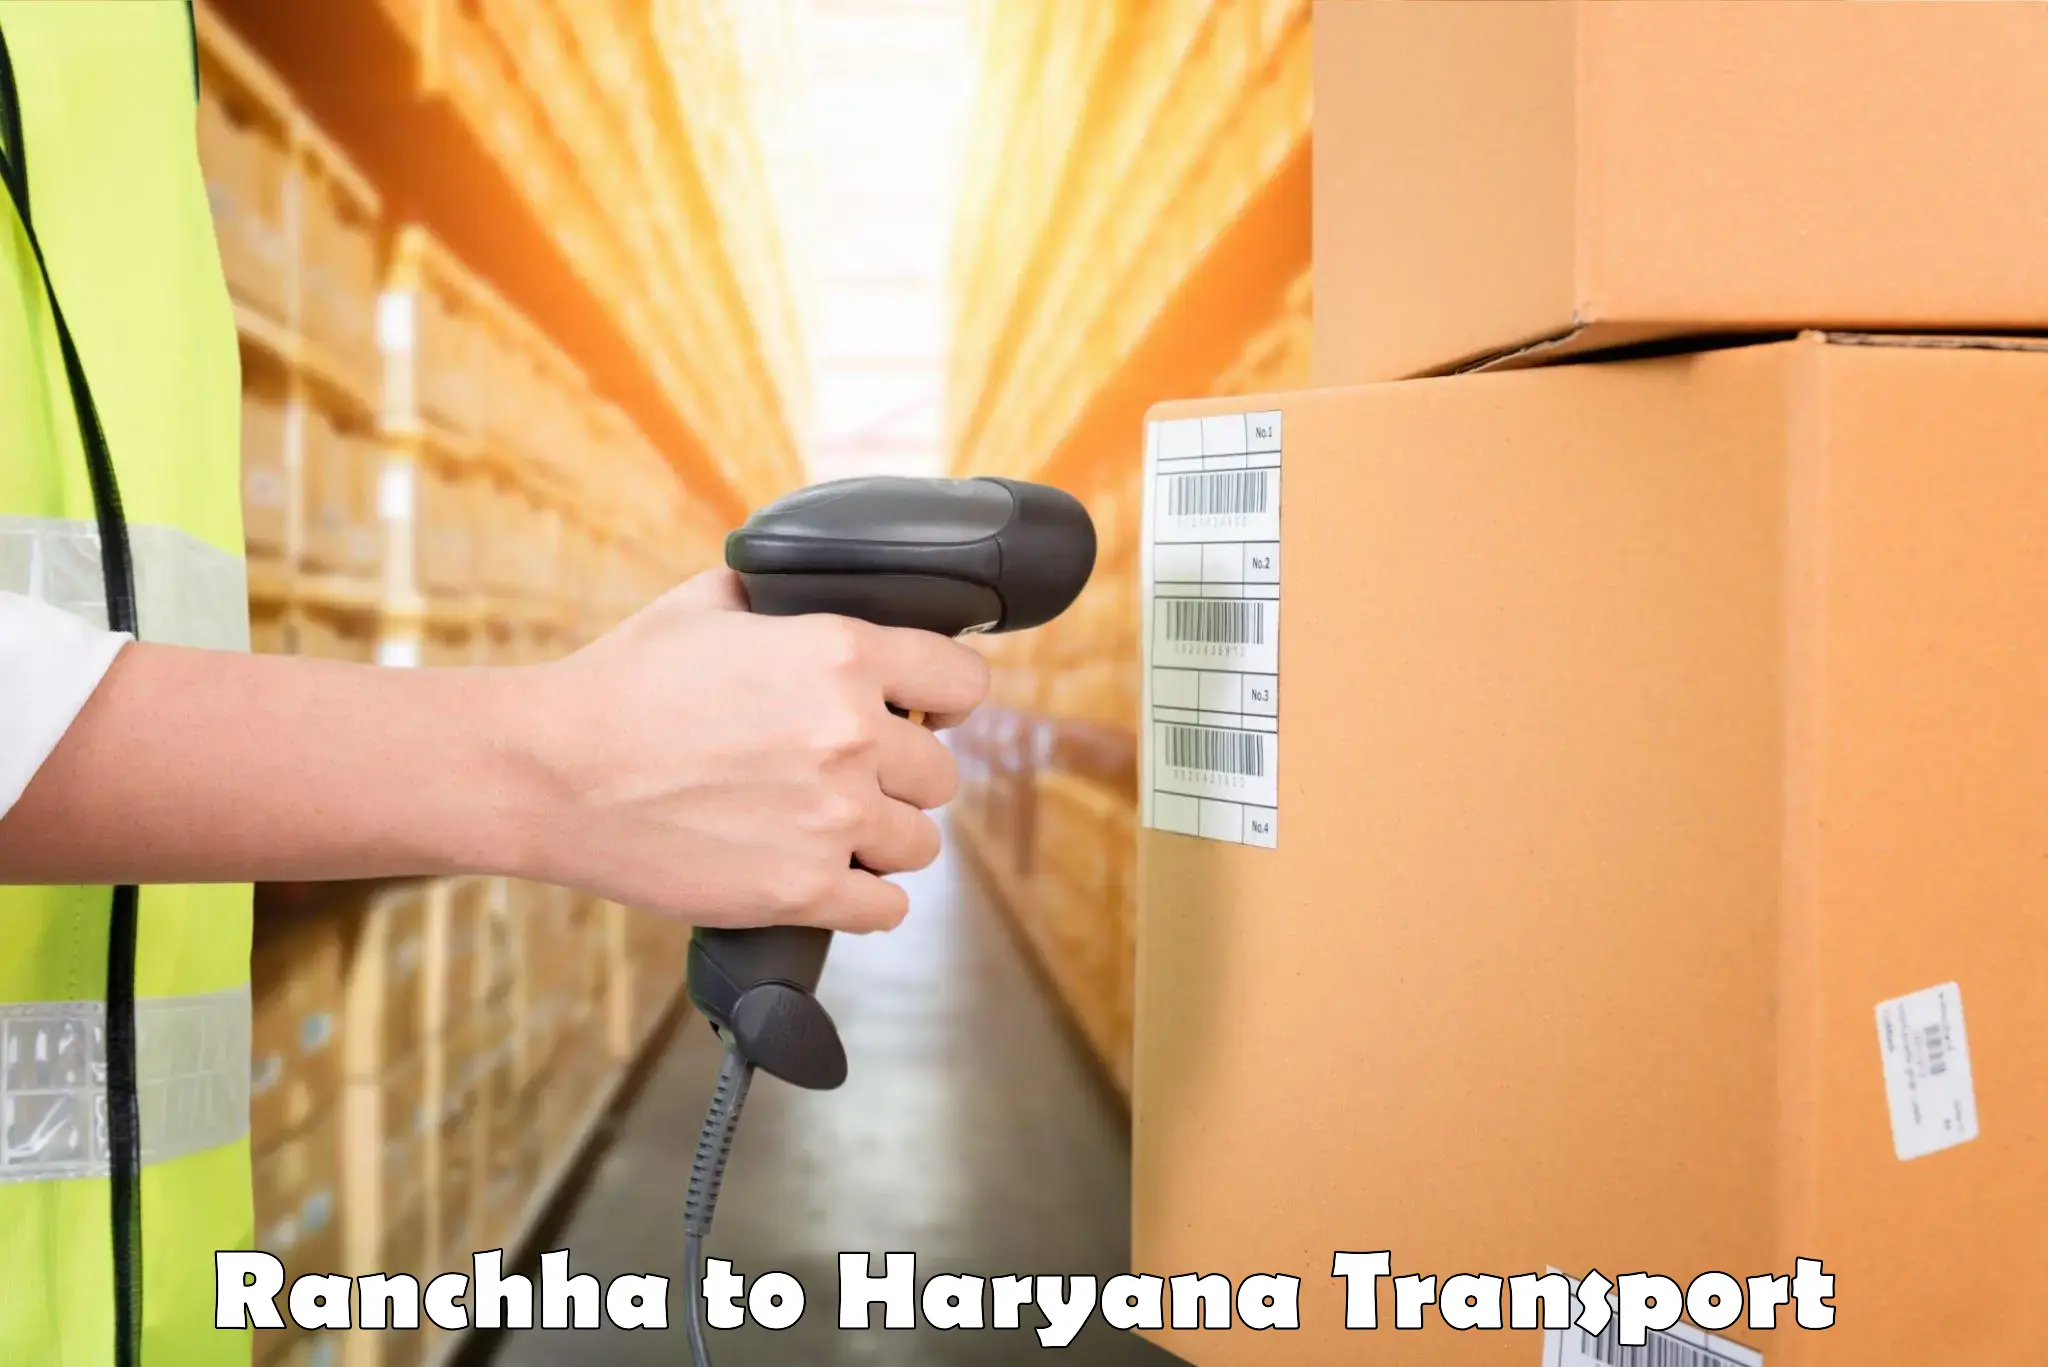 Nearby transport service Ranchha to Gurgaon